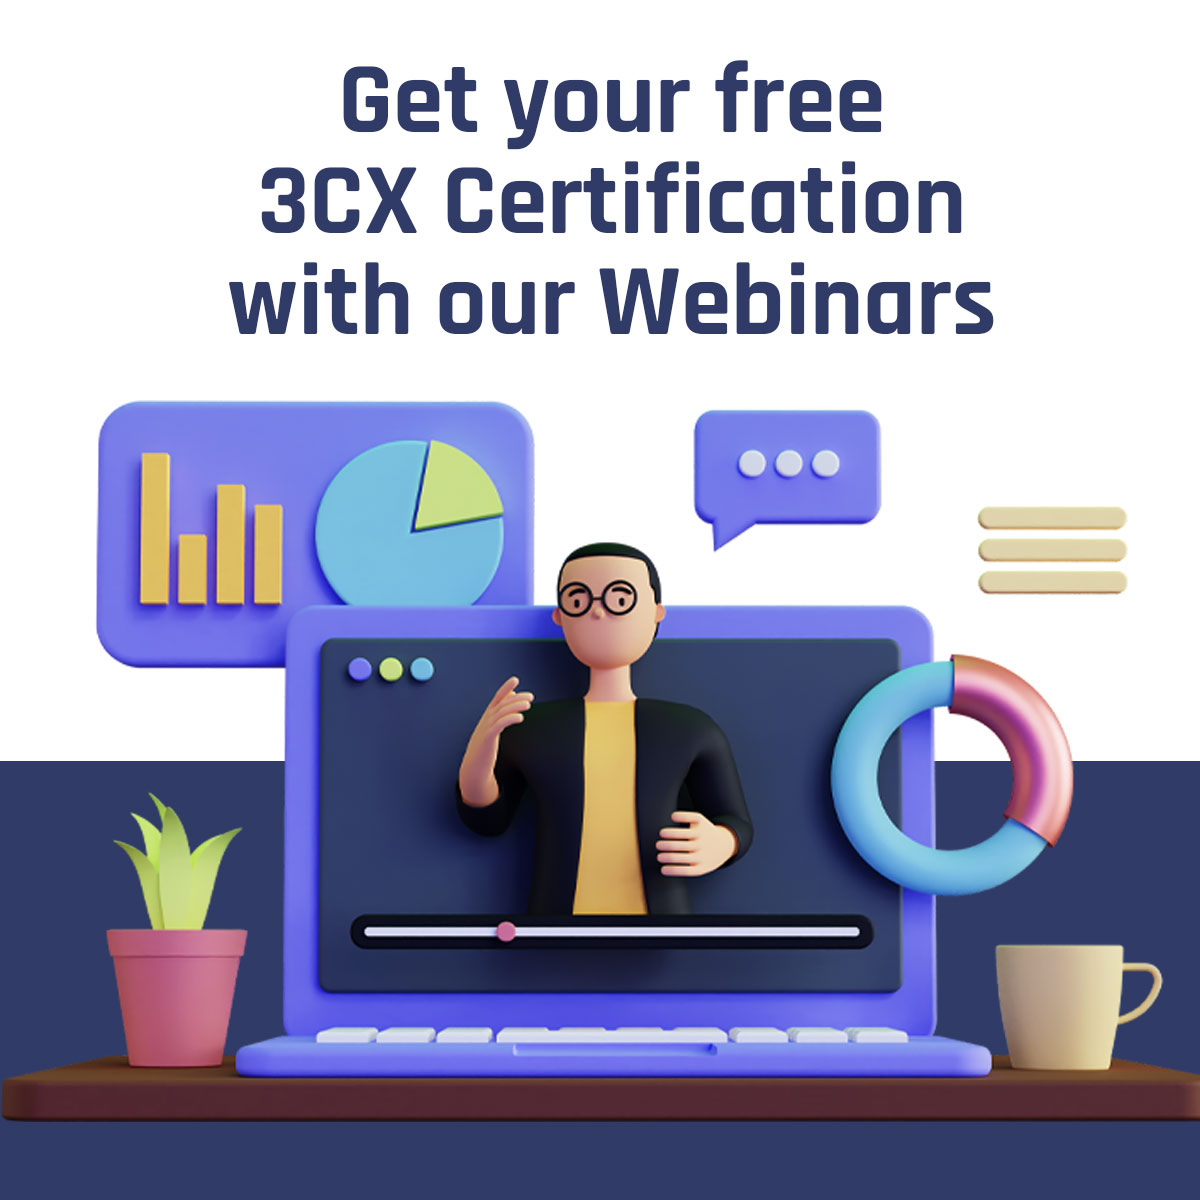 Prepare for your 3CX Certifications with our free webinars